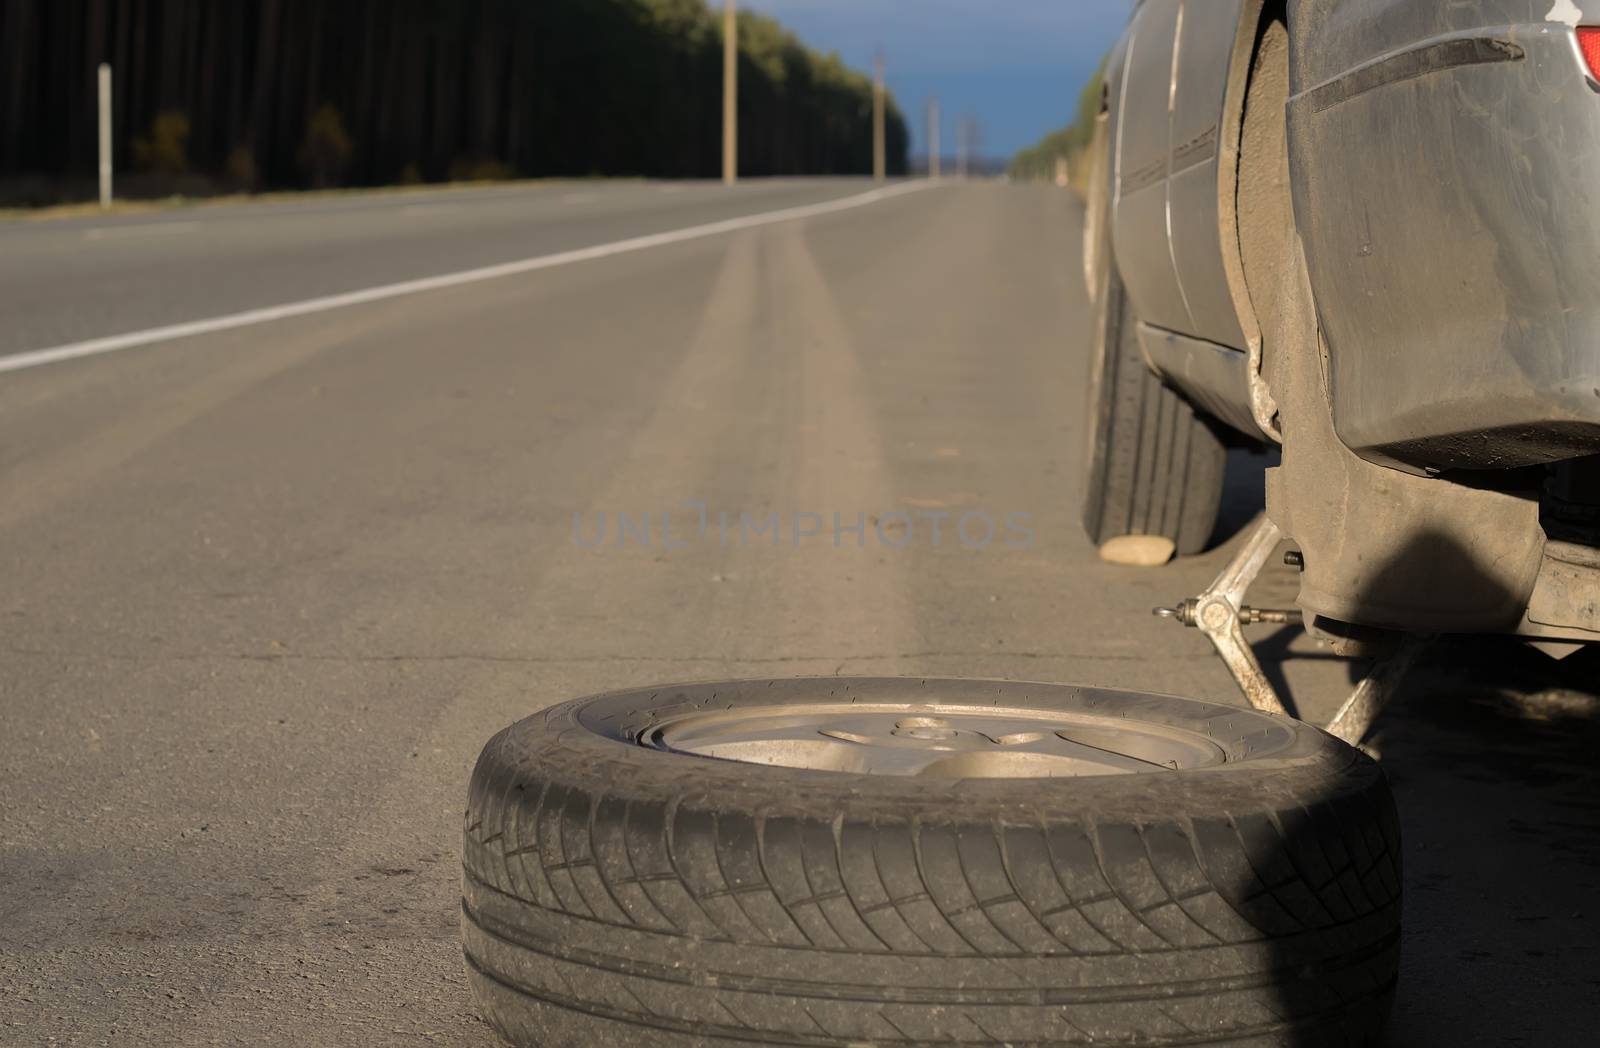 Spare wheel lying near the car. The car is mounted on the Jack. View asphalt road at sunset